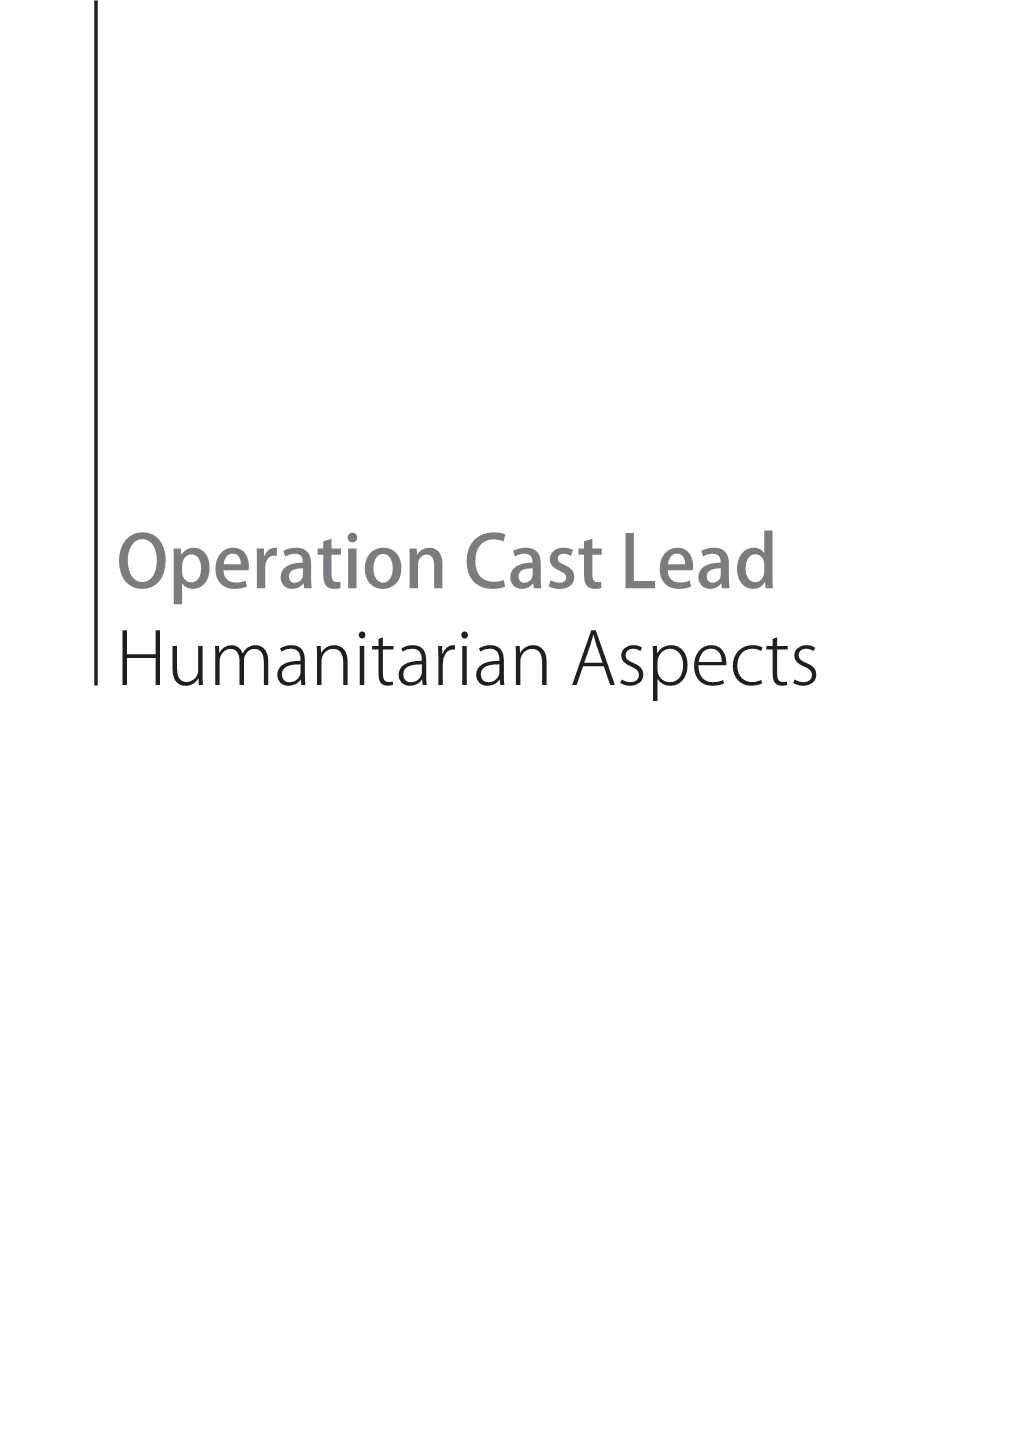 Operation Cast Lead Humanitarian Aspects Table of Contents